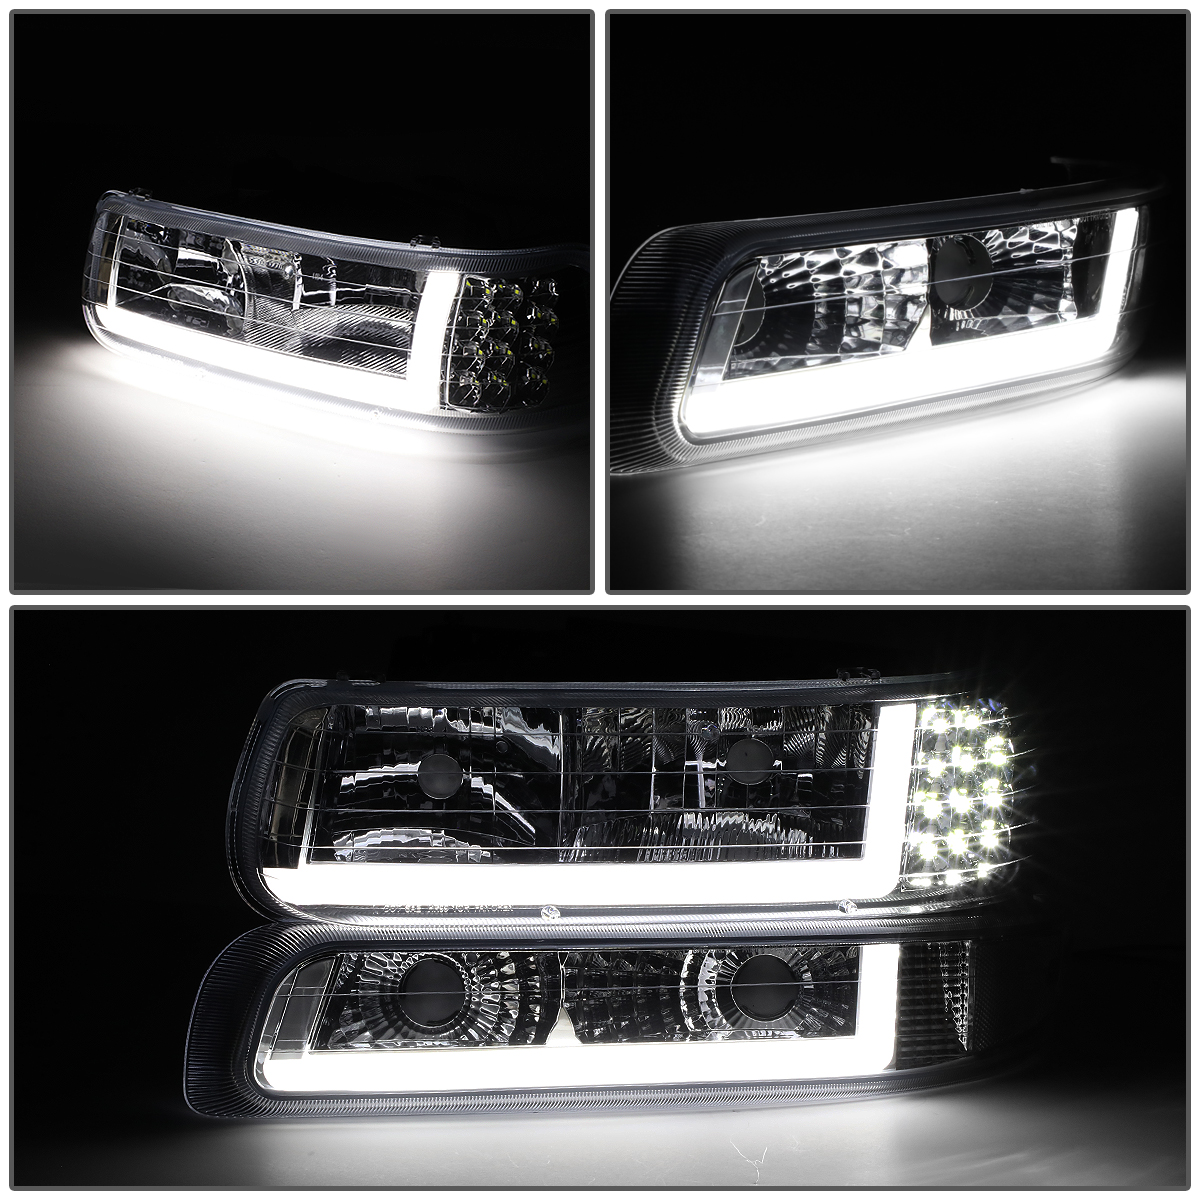 DNA Motoring HL-LB-CSIL99-CH-CL1 Headlight Fits Truck 1999 to 2002 Chevy  Silverado 2000 to 2006 Suburban 1500 2500 Tahoe LED DRL Bumper Signal Lamps  Chrome/Clear 01 03 04 05